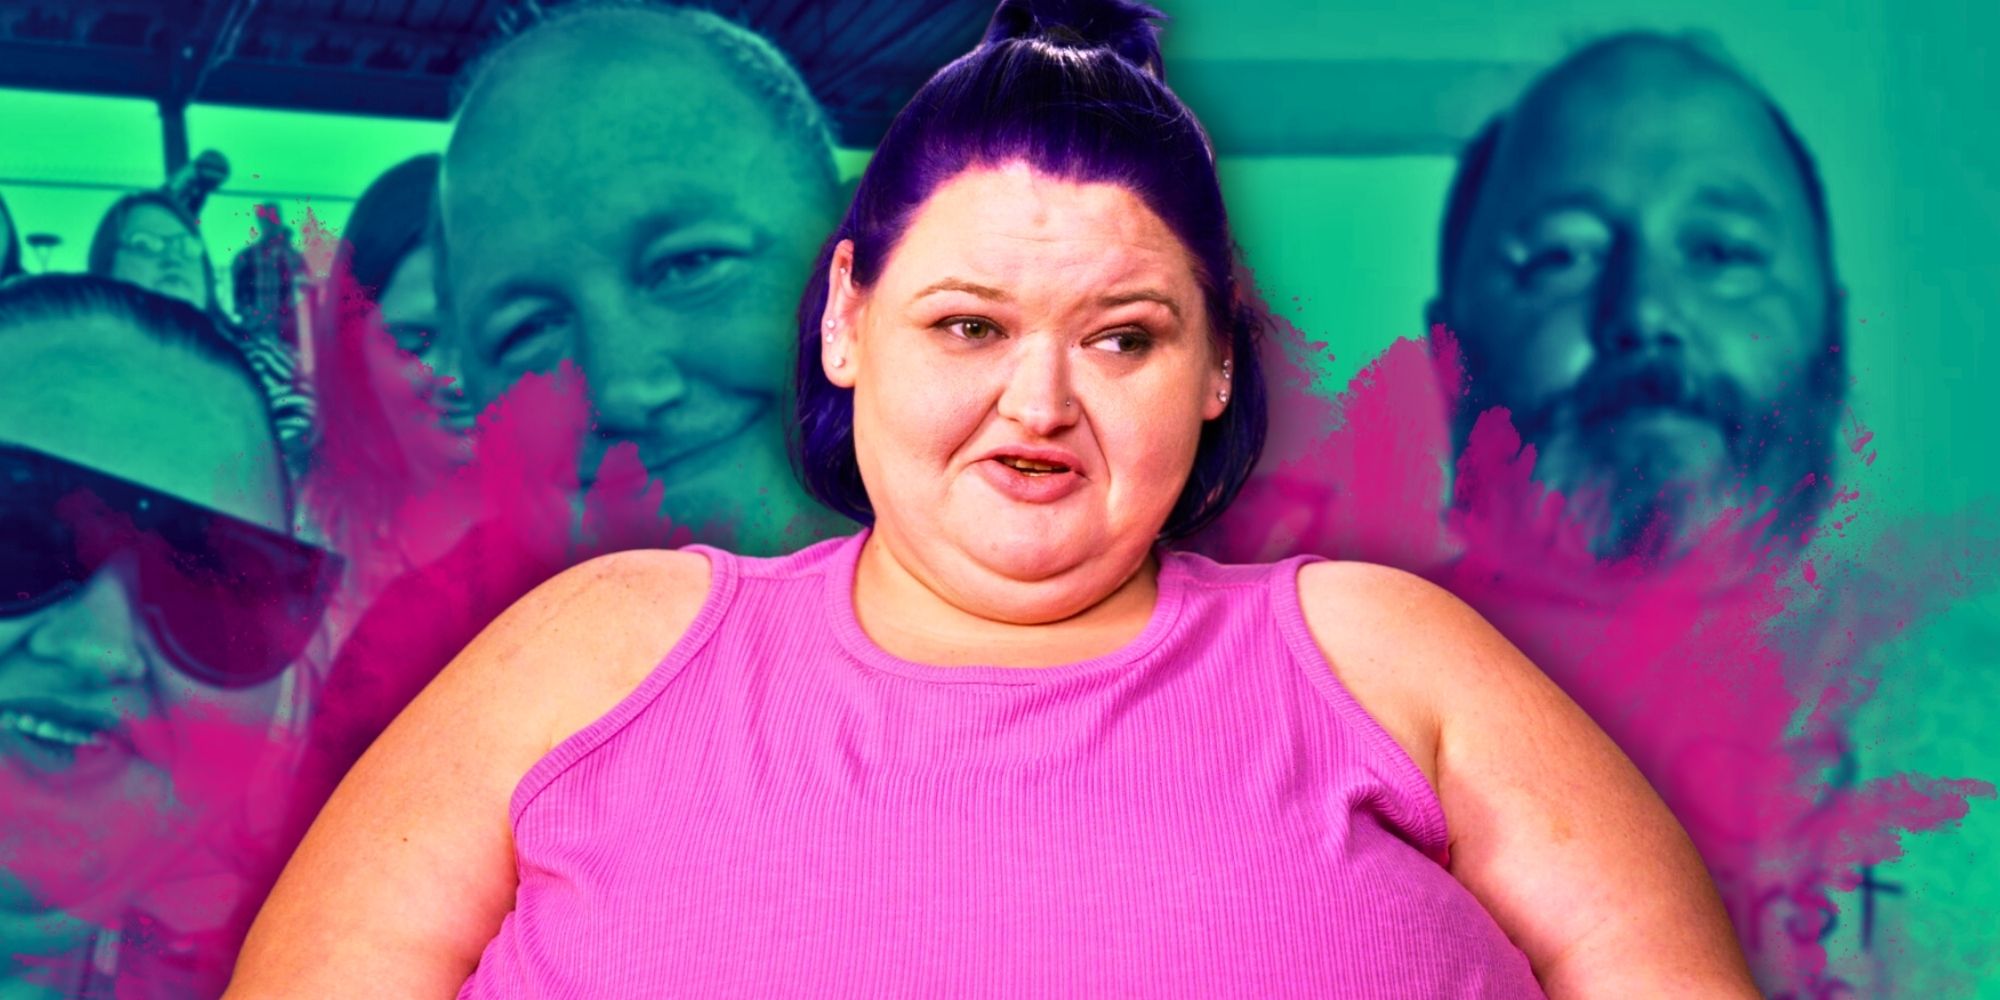  Amy and Michael from 1000-lb Sisters with blue montage background